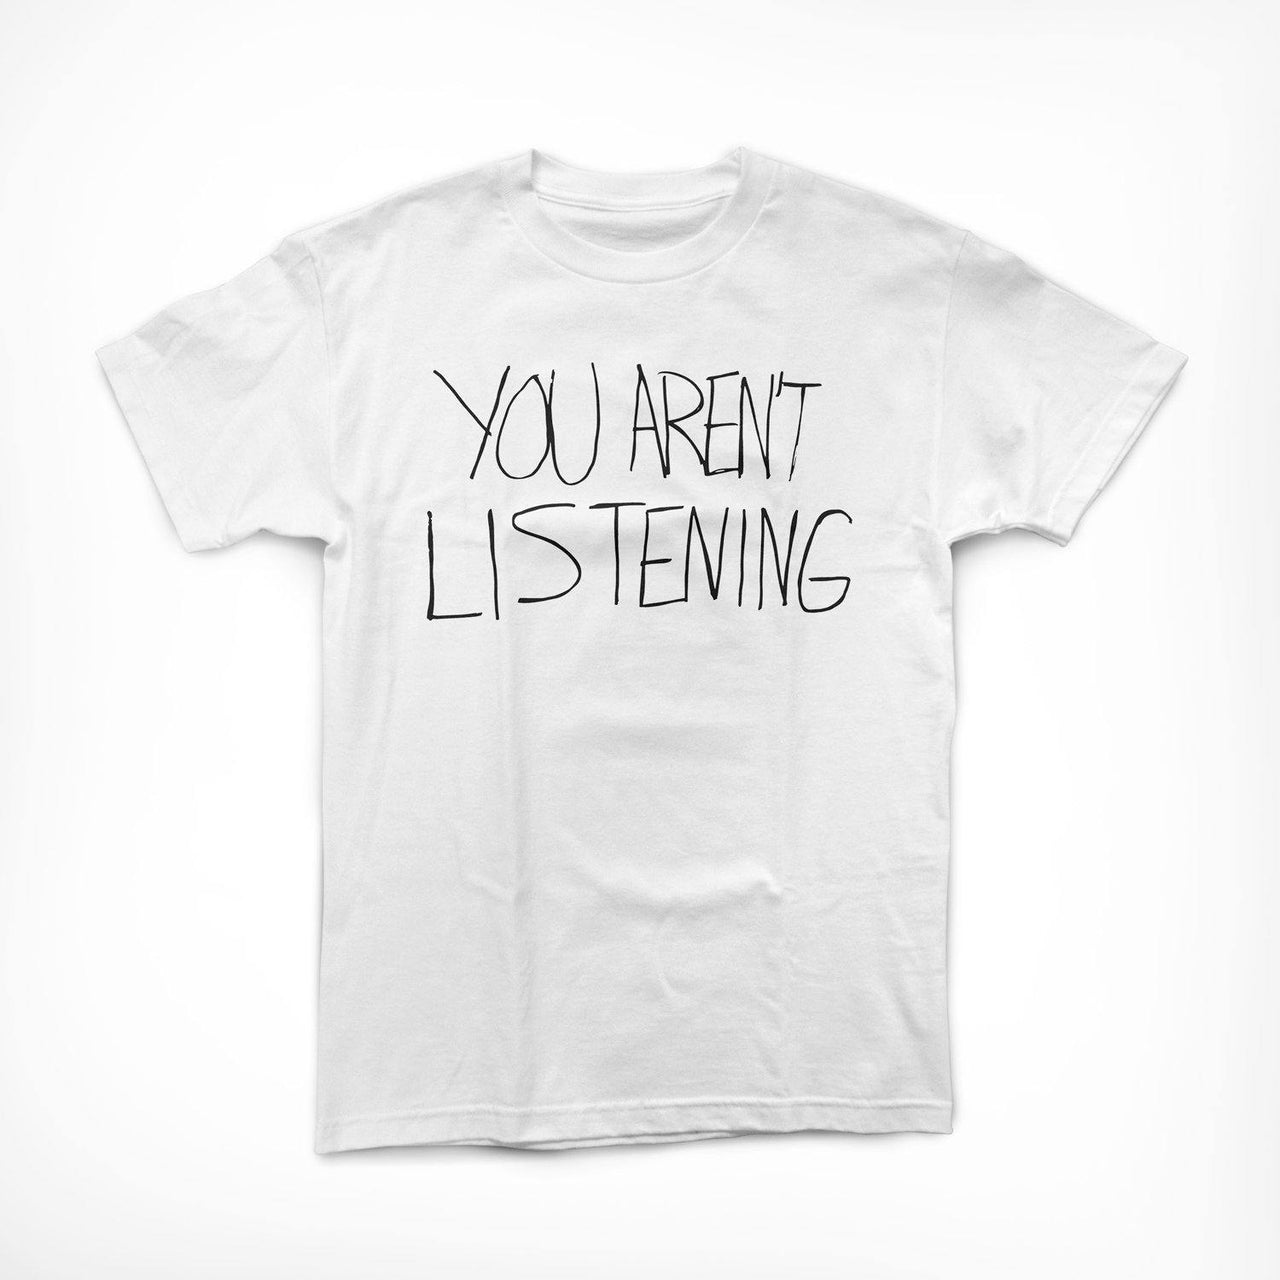 Buy Now – Malcolm Jenkins Foundation "You Aren't Listening" Shirt – Philly & Sports Merch – Cracked Bell